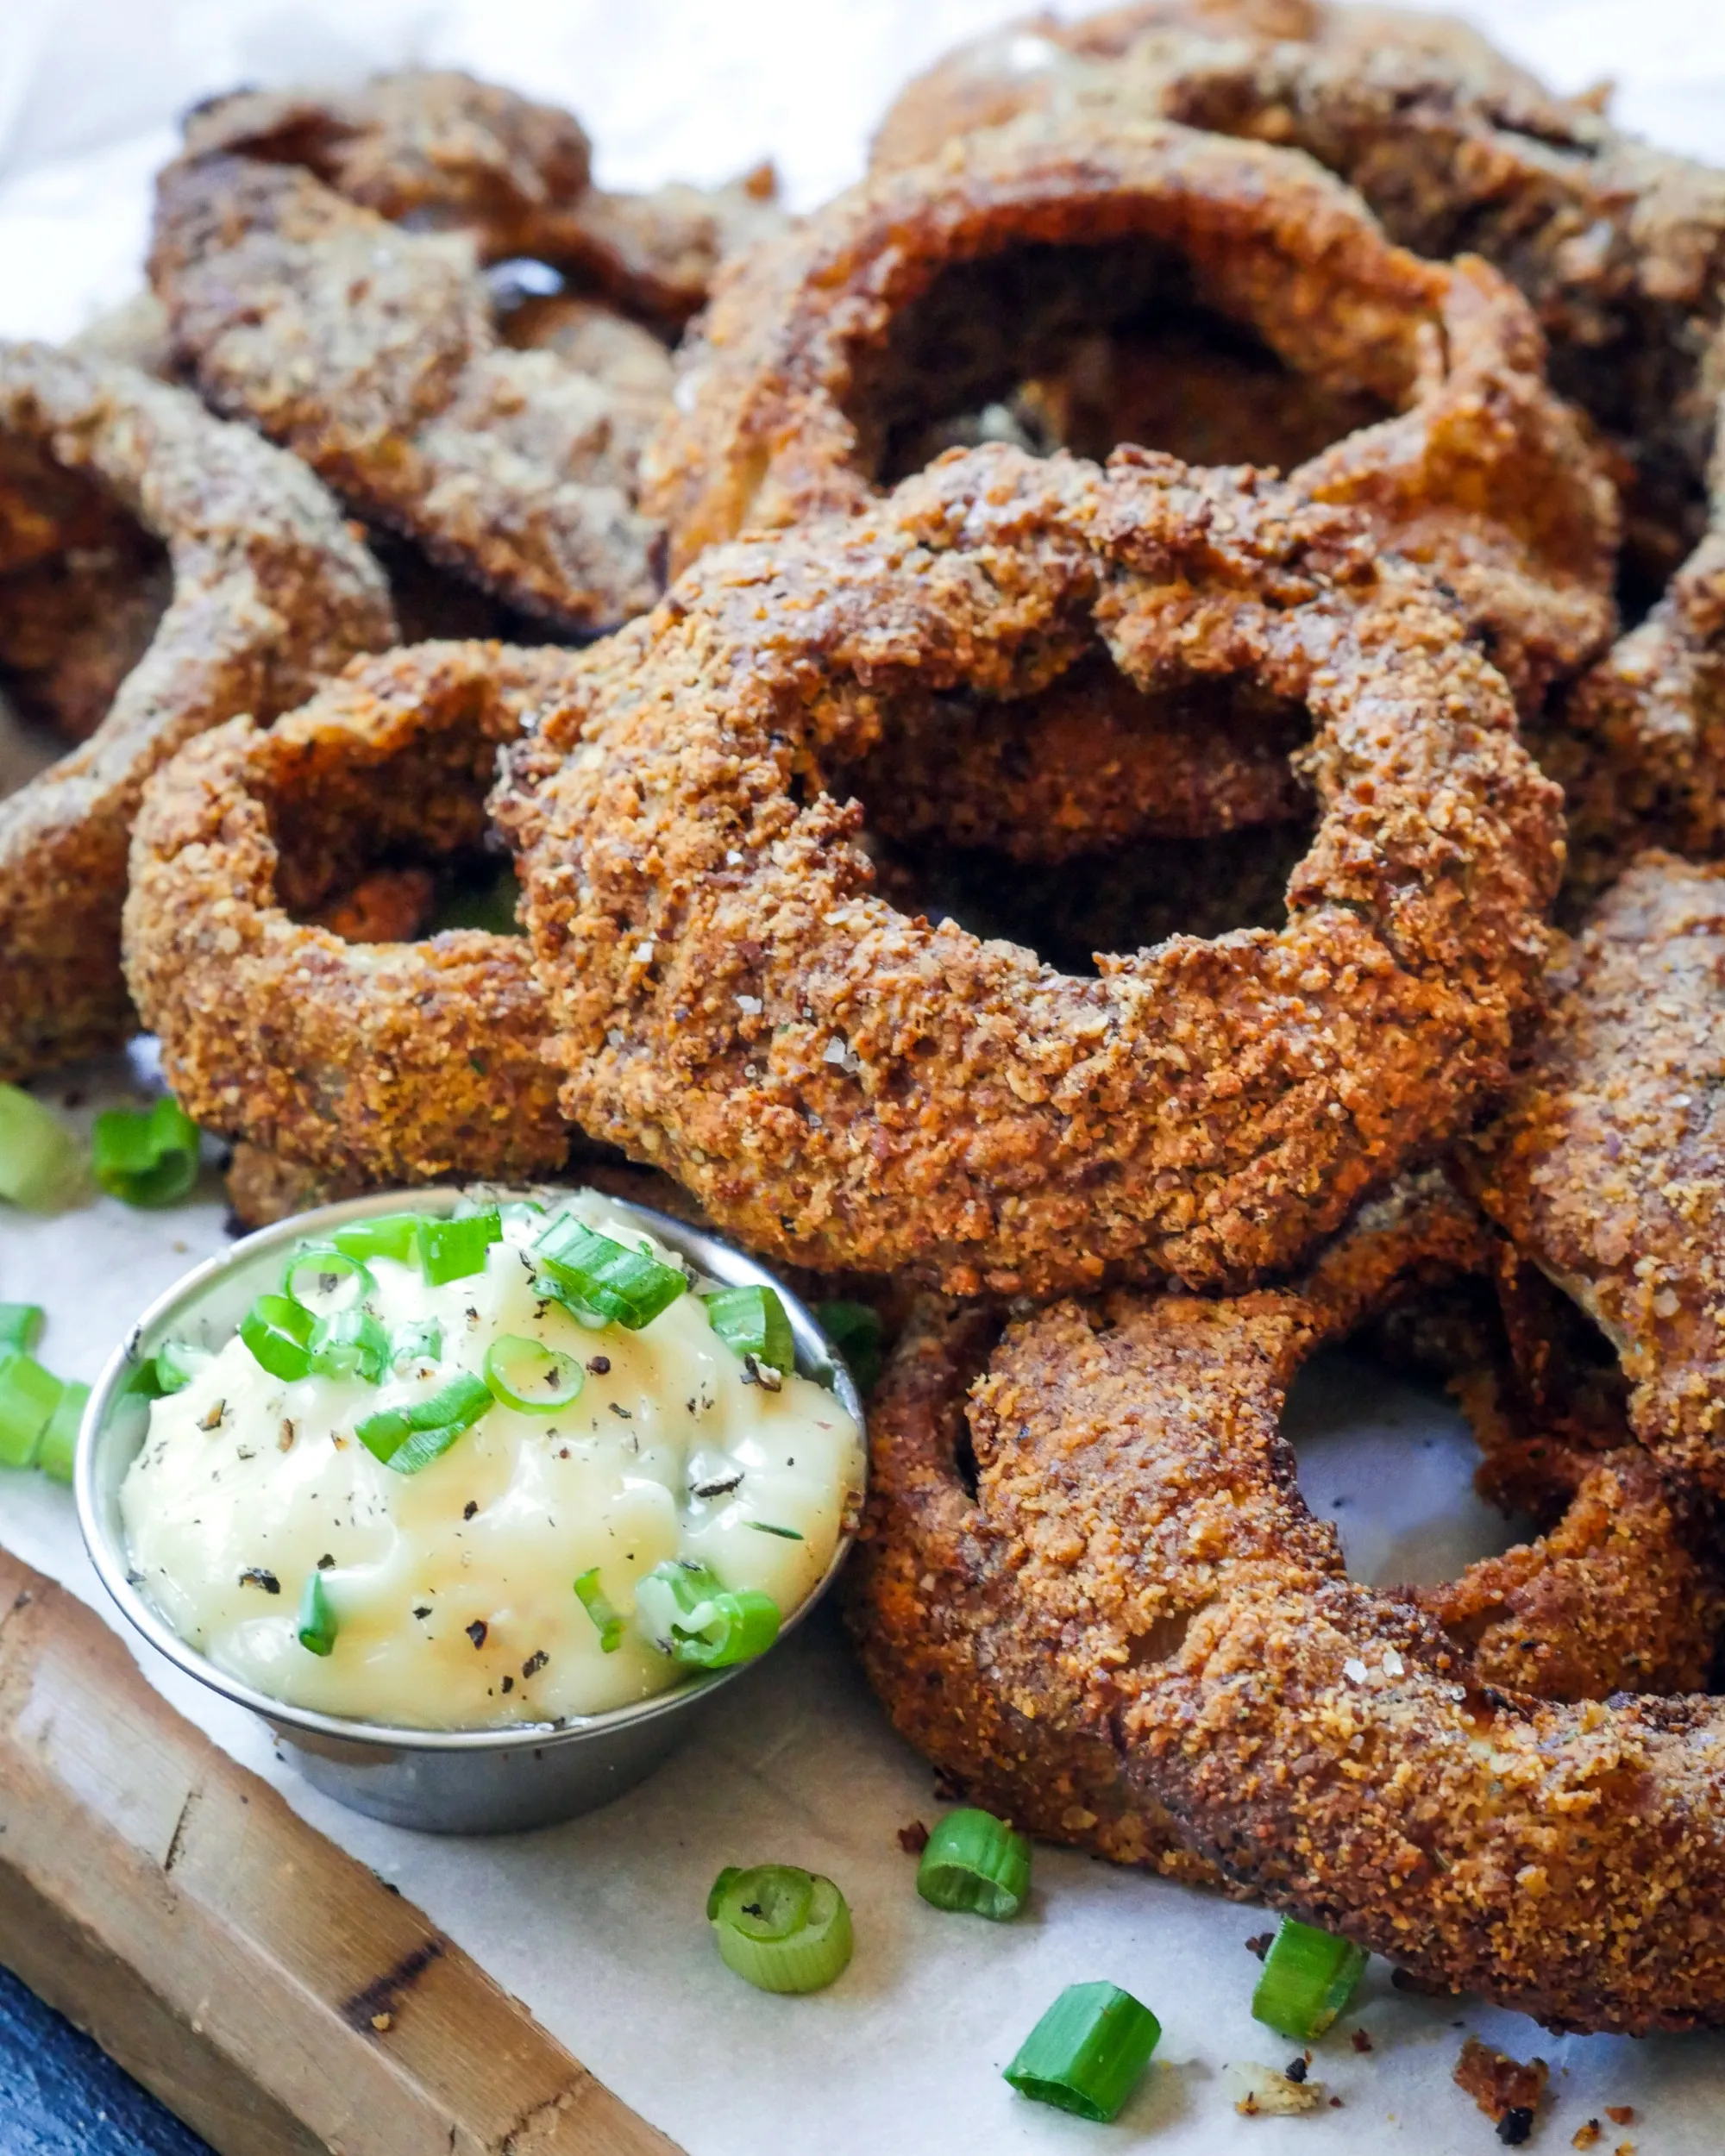 Whole30 Almond-Crusted Onion Rings with Green Onion–Cracked Pepper Aioli From The Whole30 Friends & Family